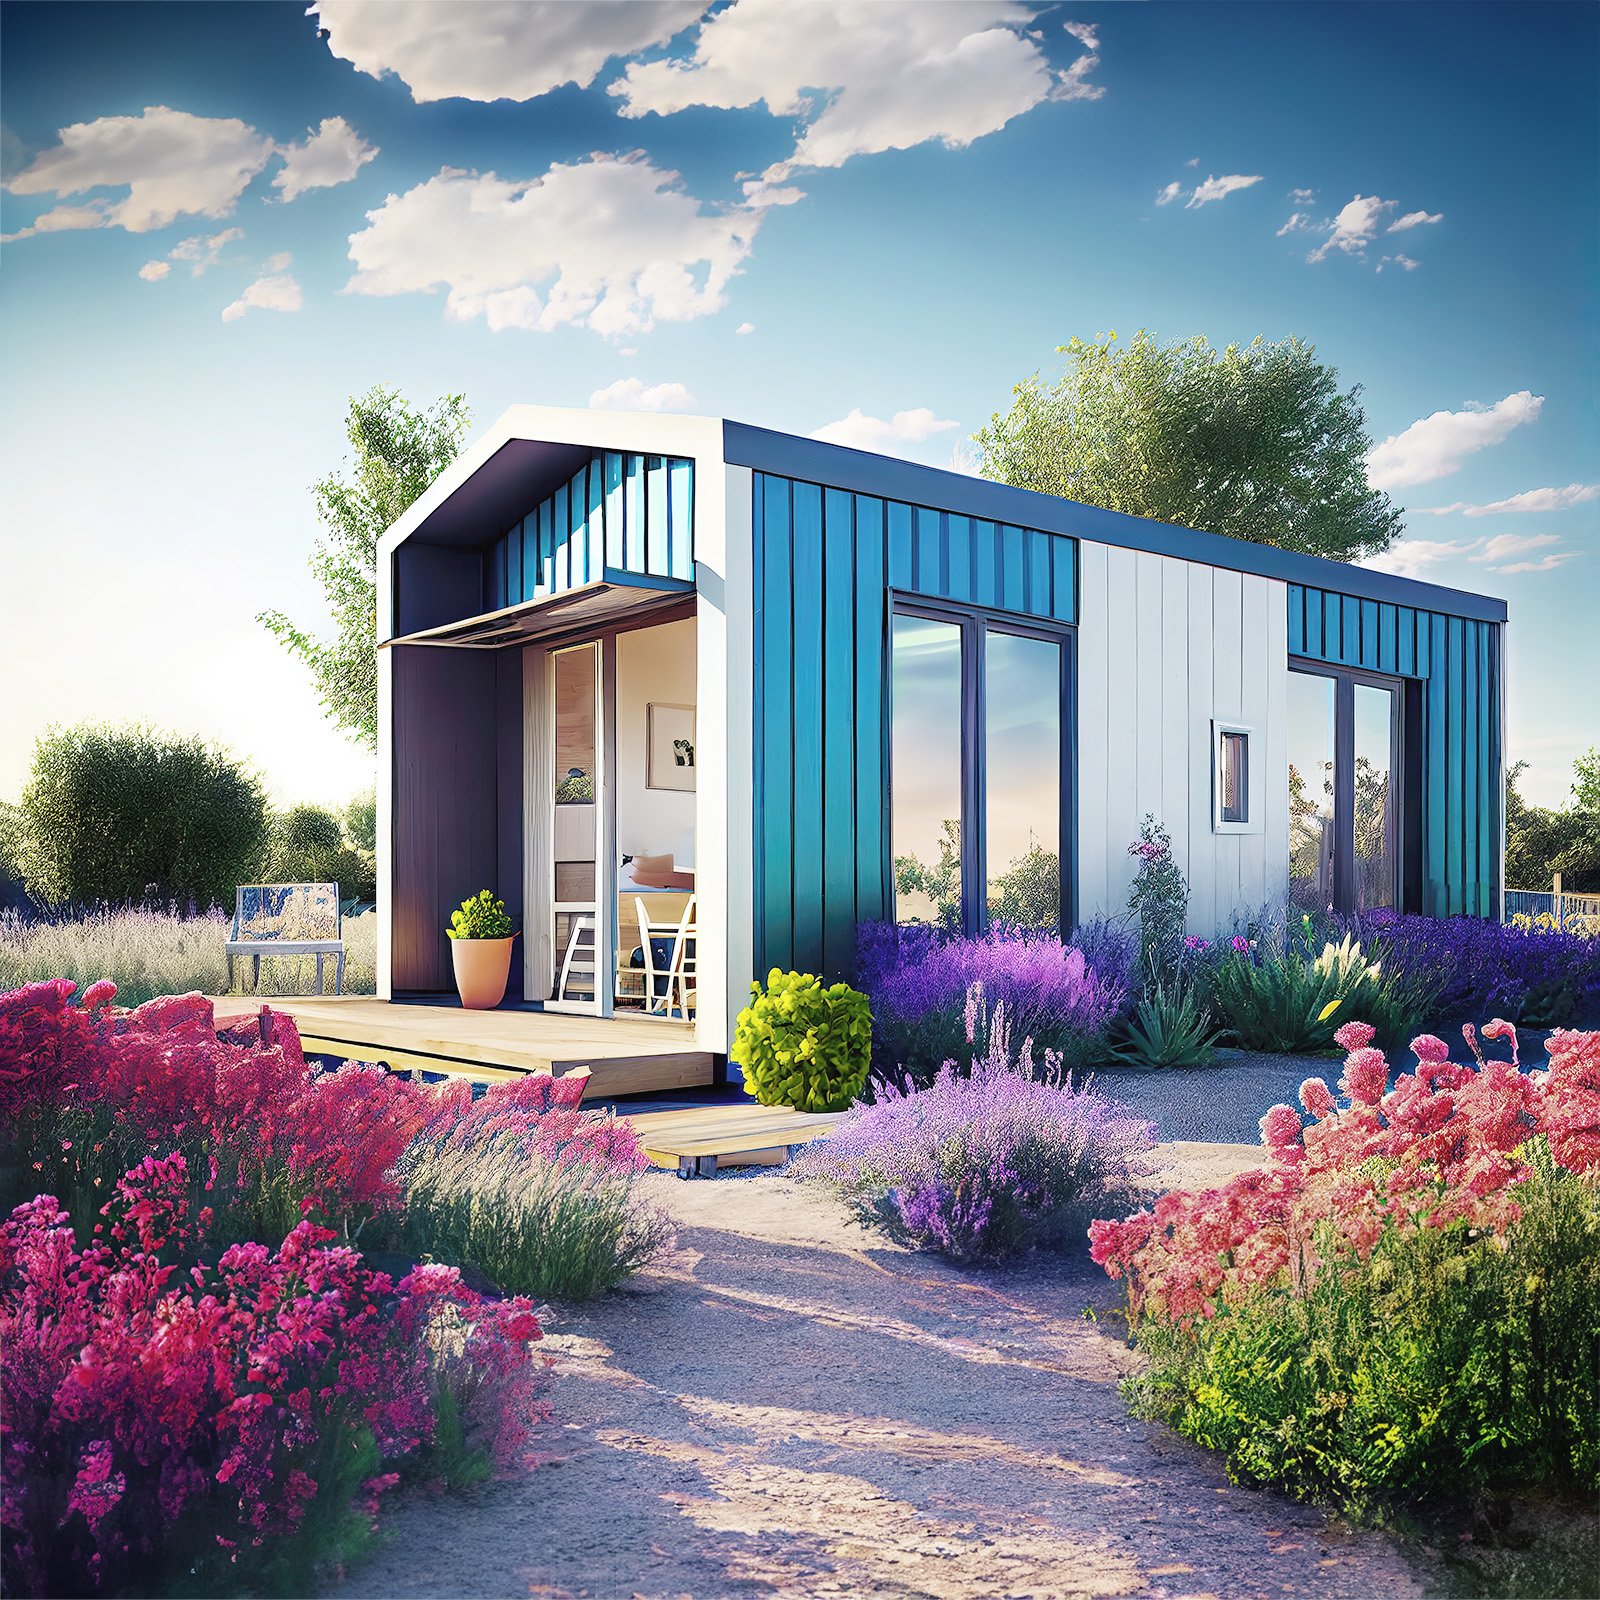 Self-sufficient and sustainable living in the Tiny House